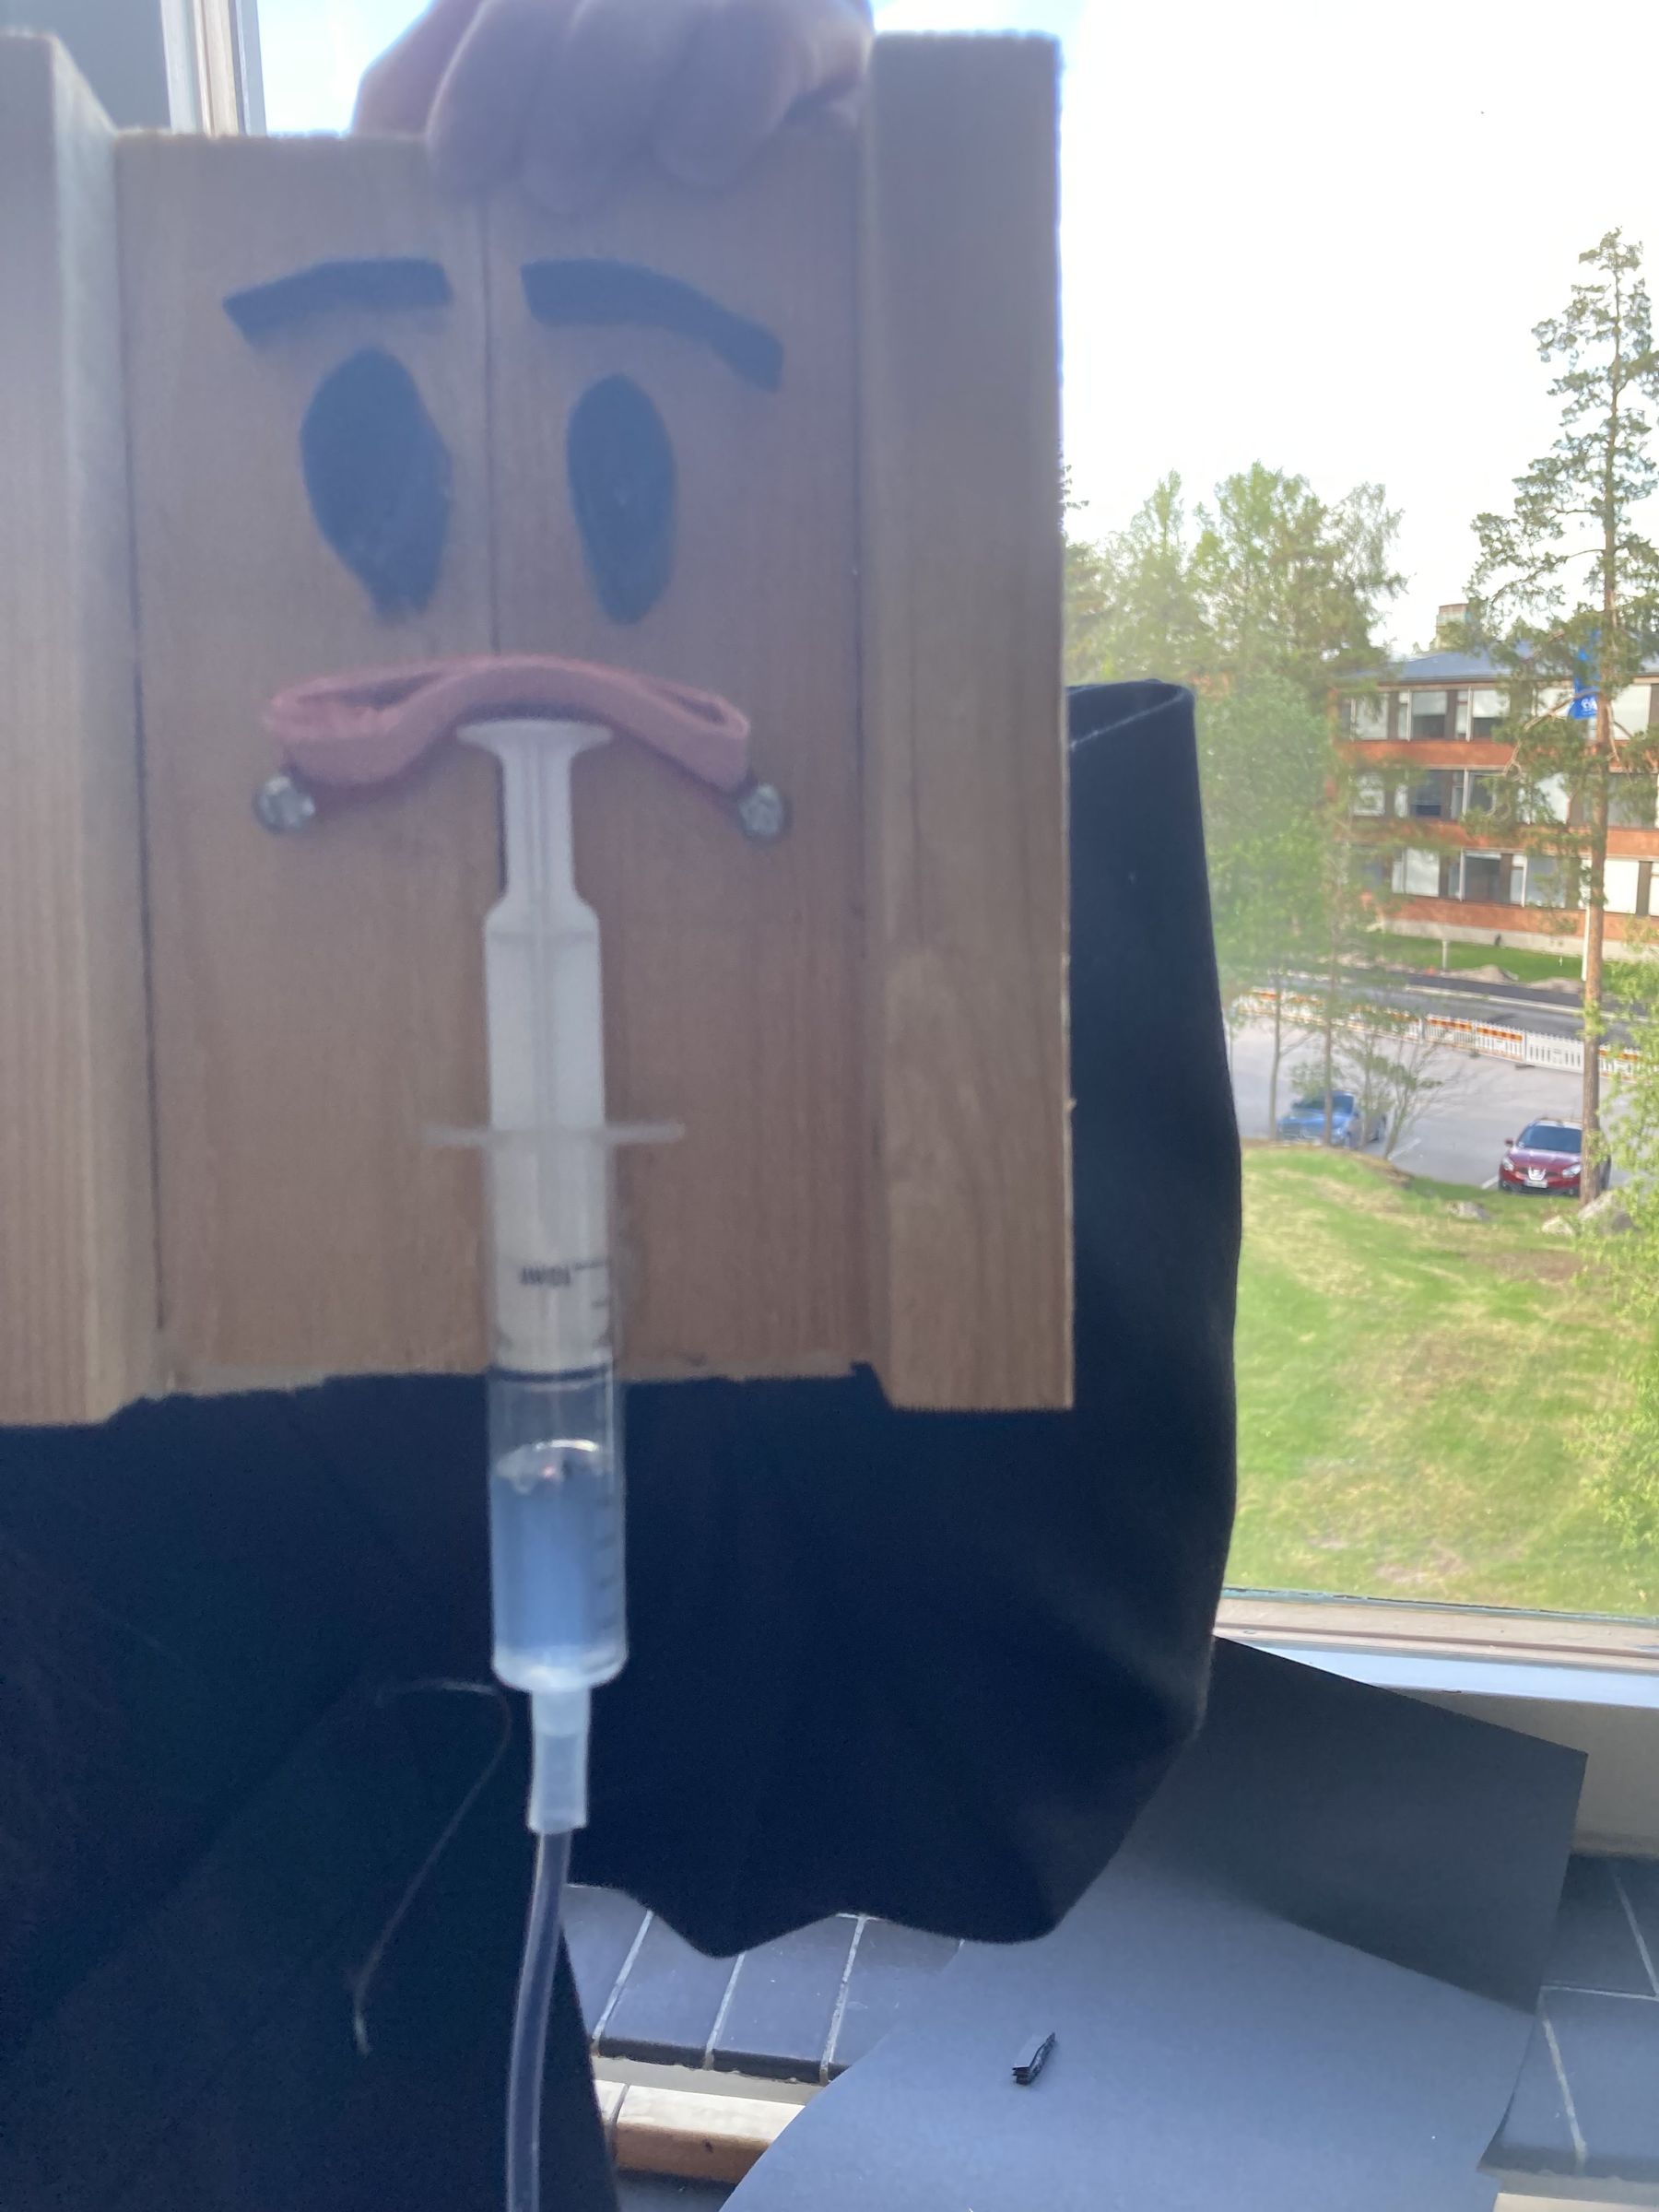 Syringe with a smiley face.